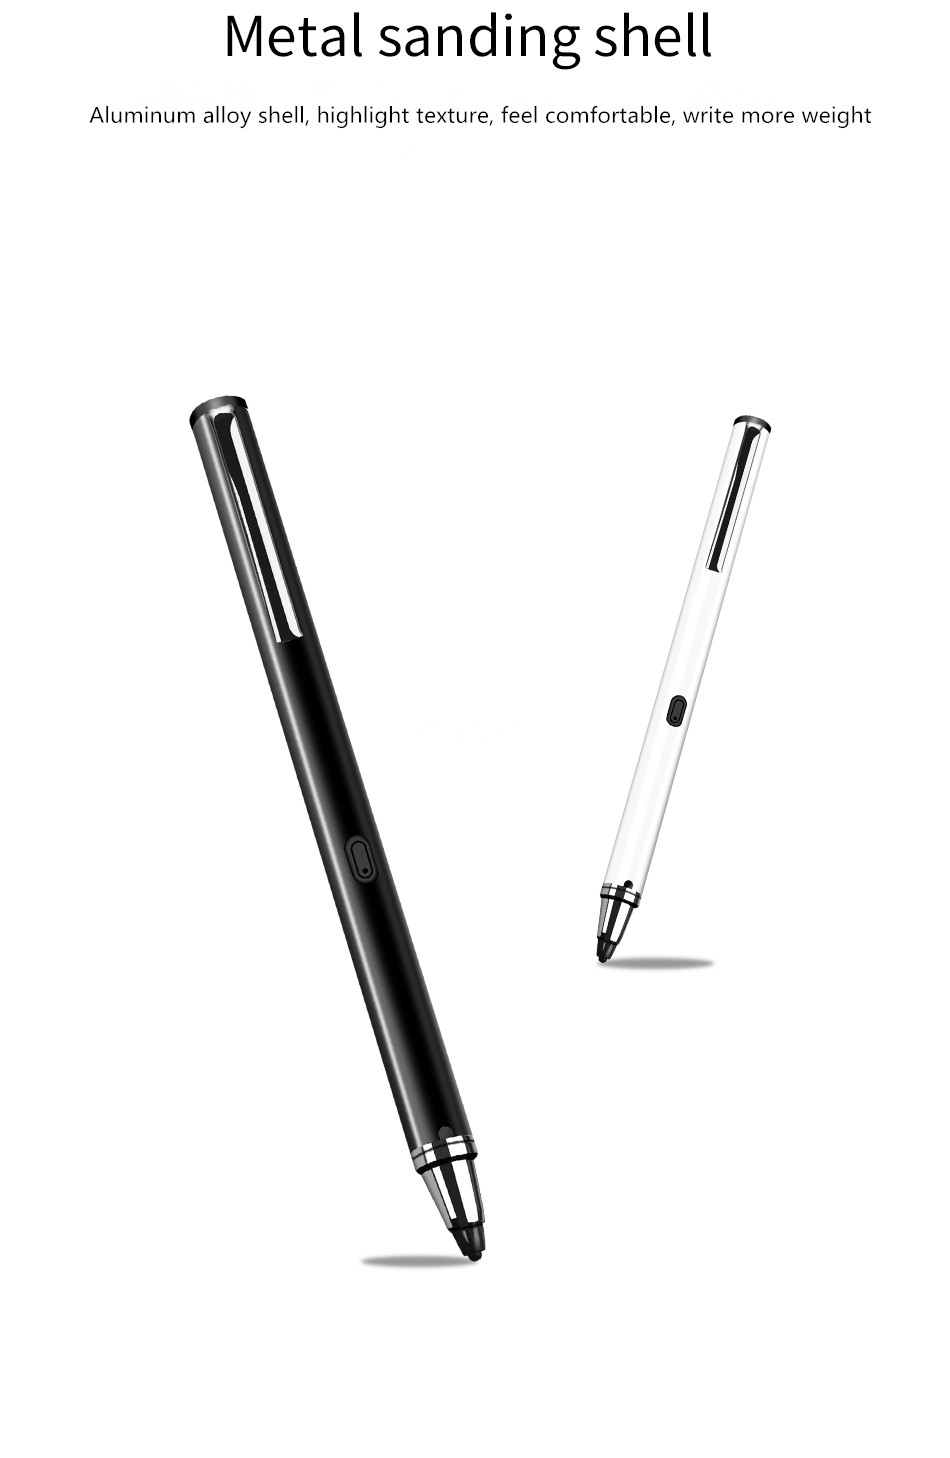 WIWU P666 UNIVERSAL CAPACITIVE TOUCH SCREEN DRAWING STYLUS PEN FOR SMARTPHONE TABLET PC